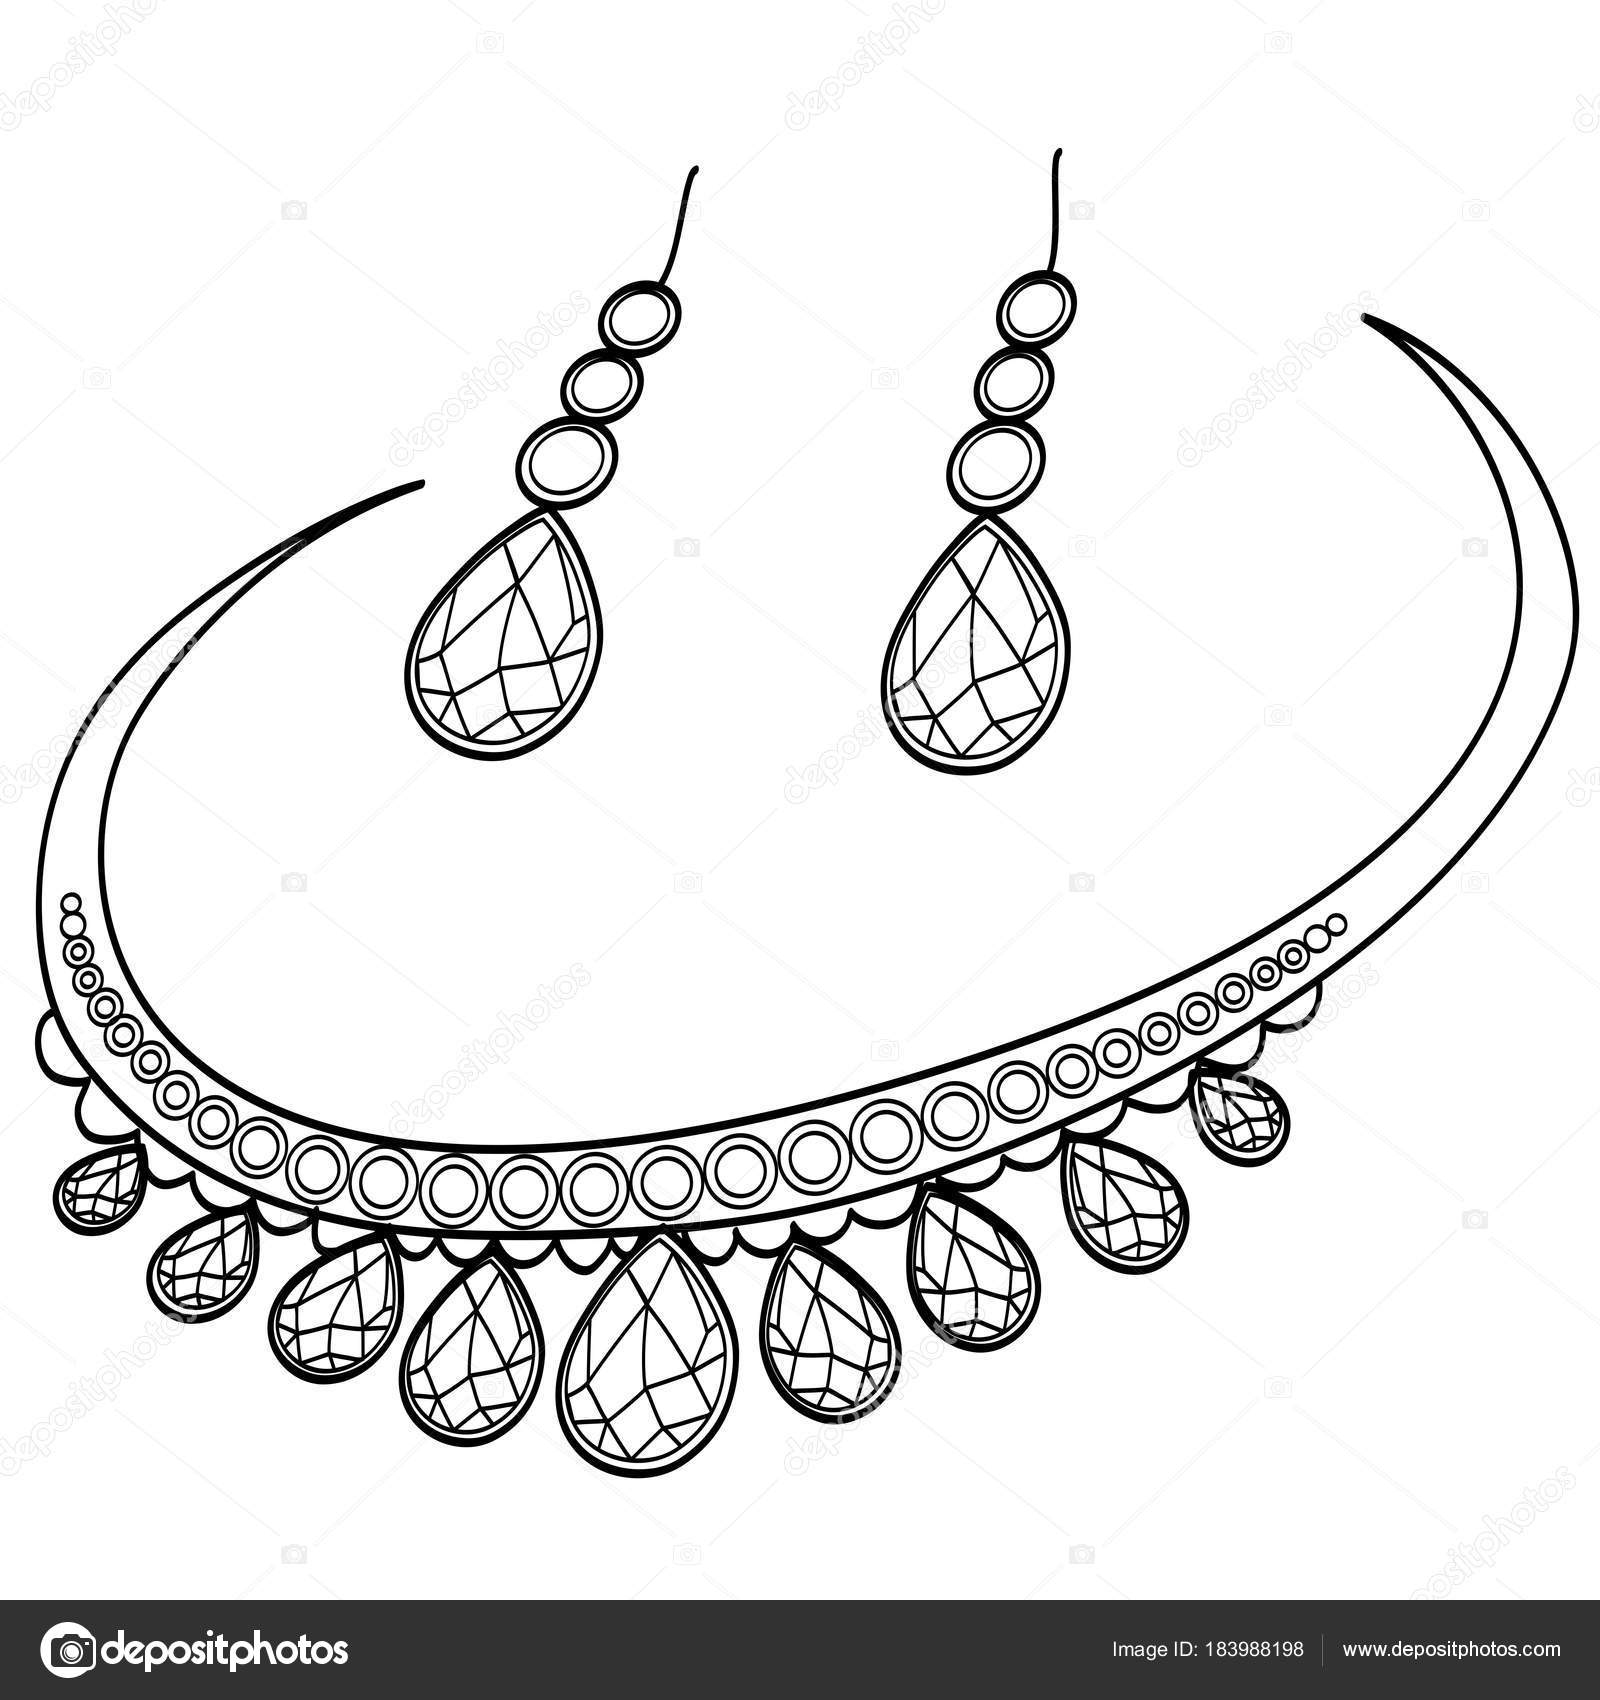 stock illustration diamond necklace and earrings coloring